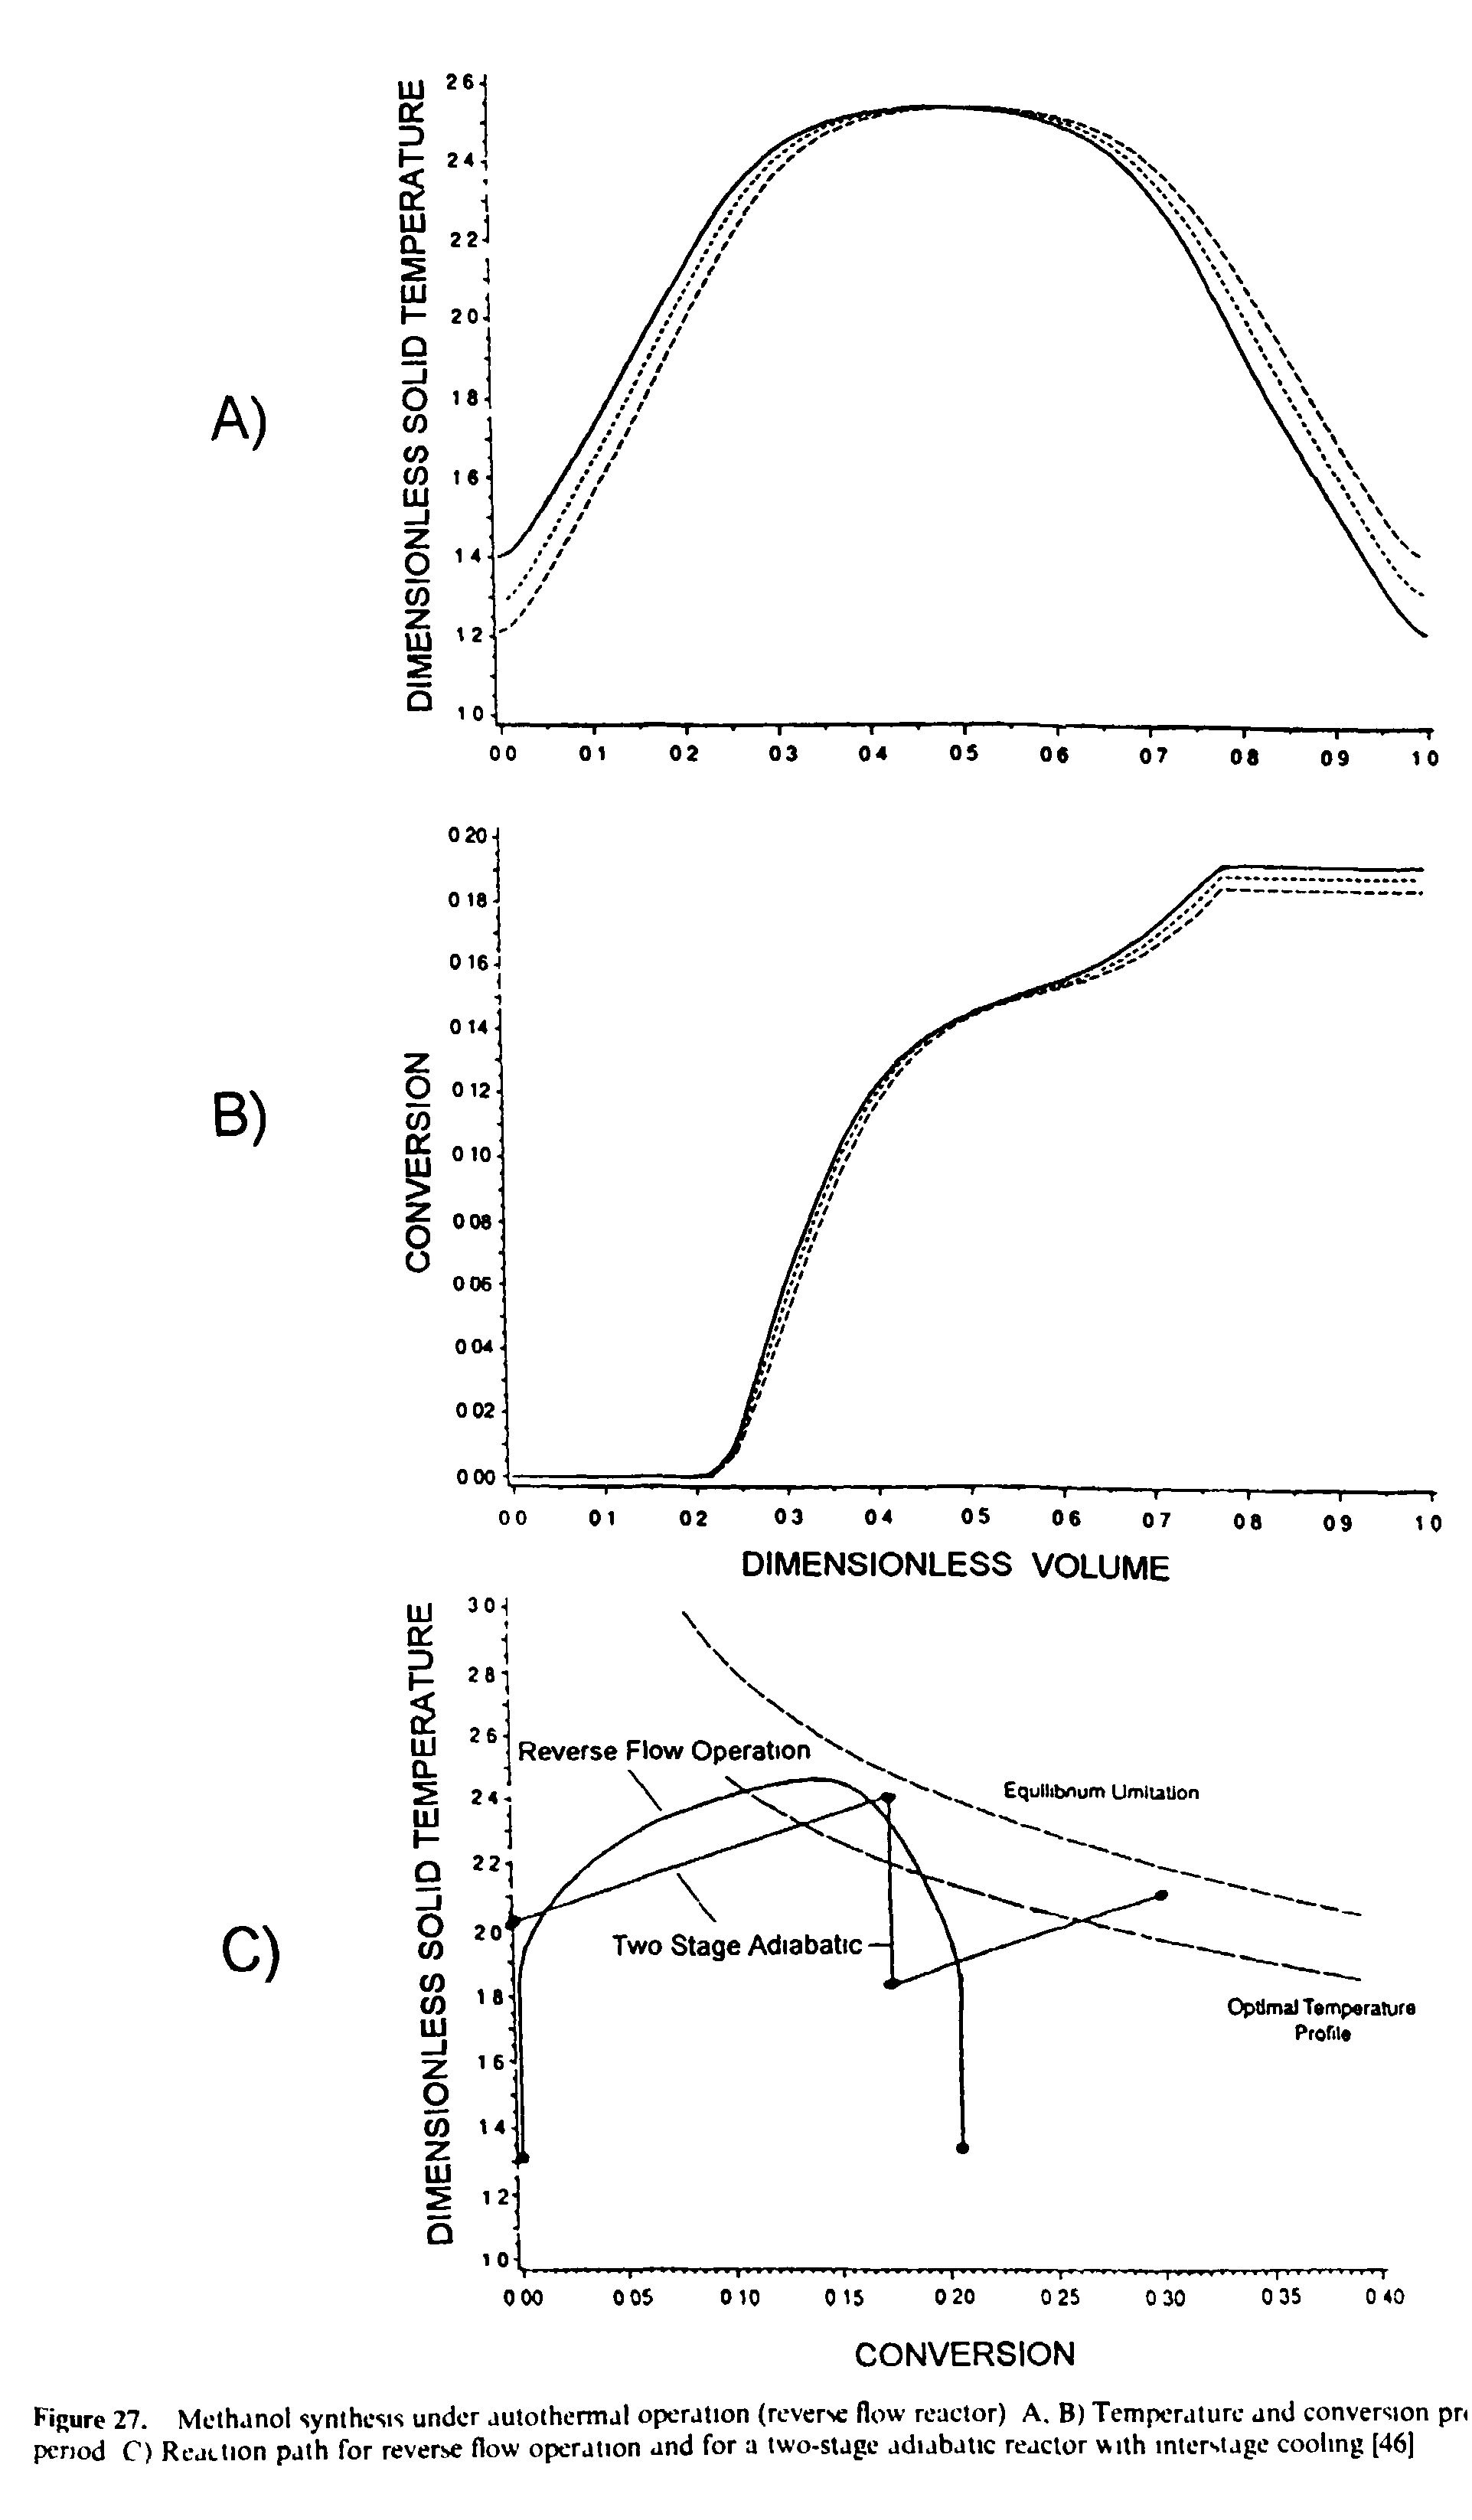 Figure 27. Methanol synthesis under autothermal operation (reverse flow reactor) A. B) Temperature and conversion pr< period C) Reaction path for reverse flow operation and for a two-stage adiabatic reactor with interstage cooling [46]...